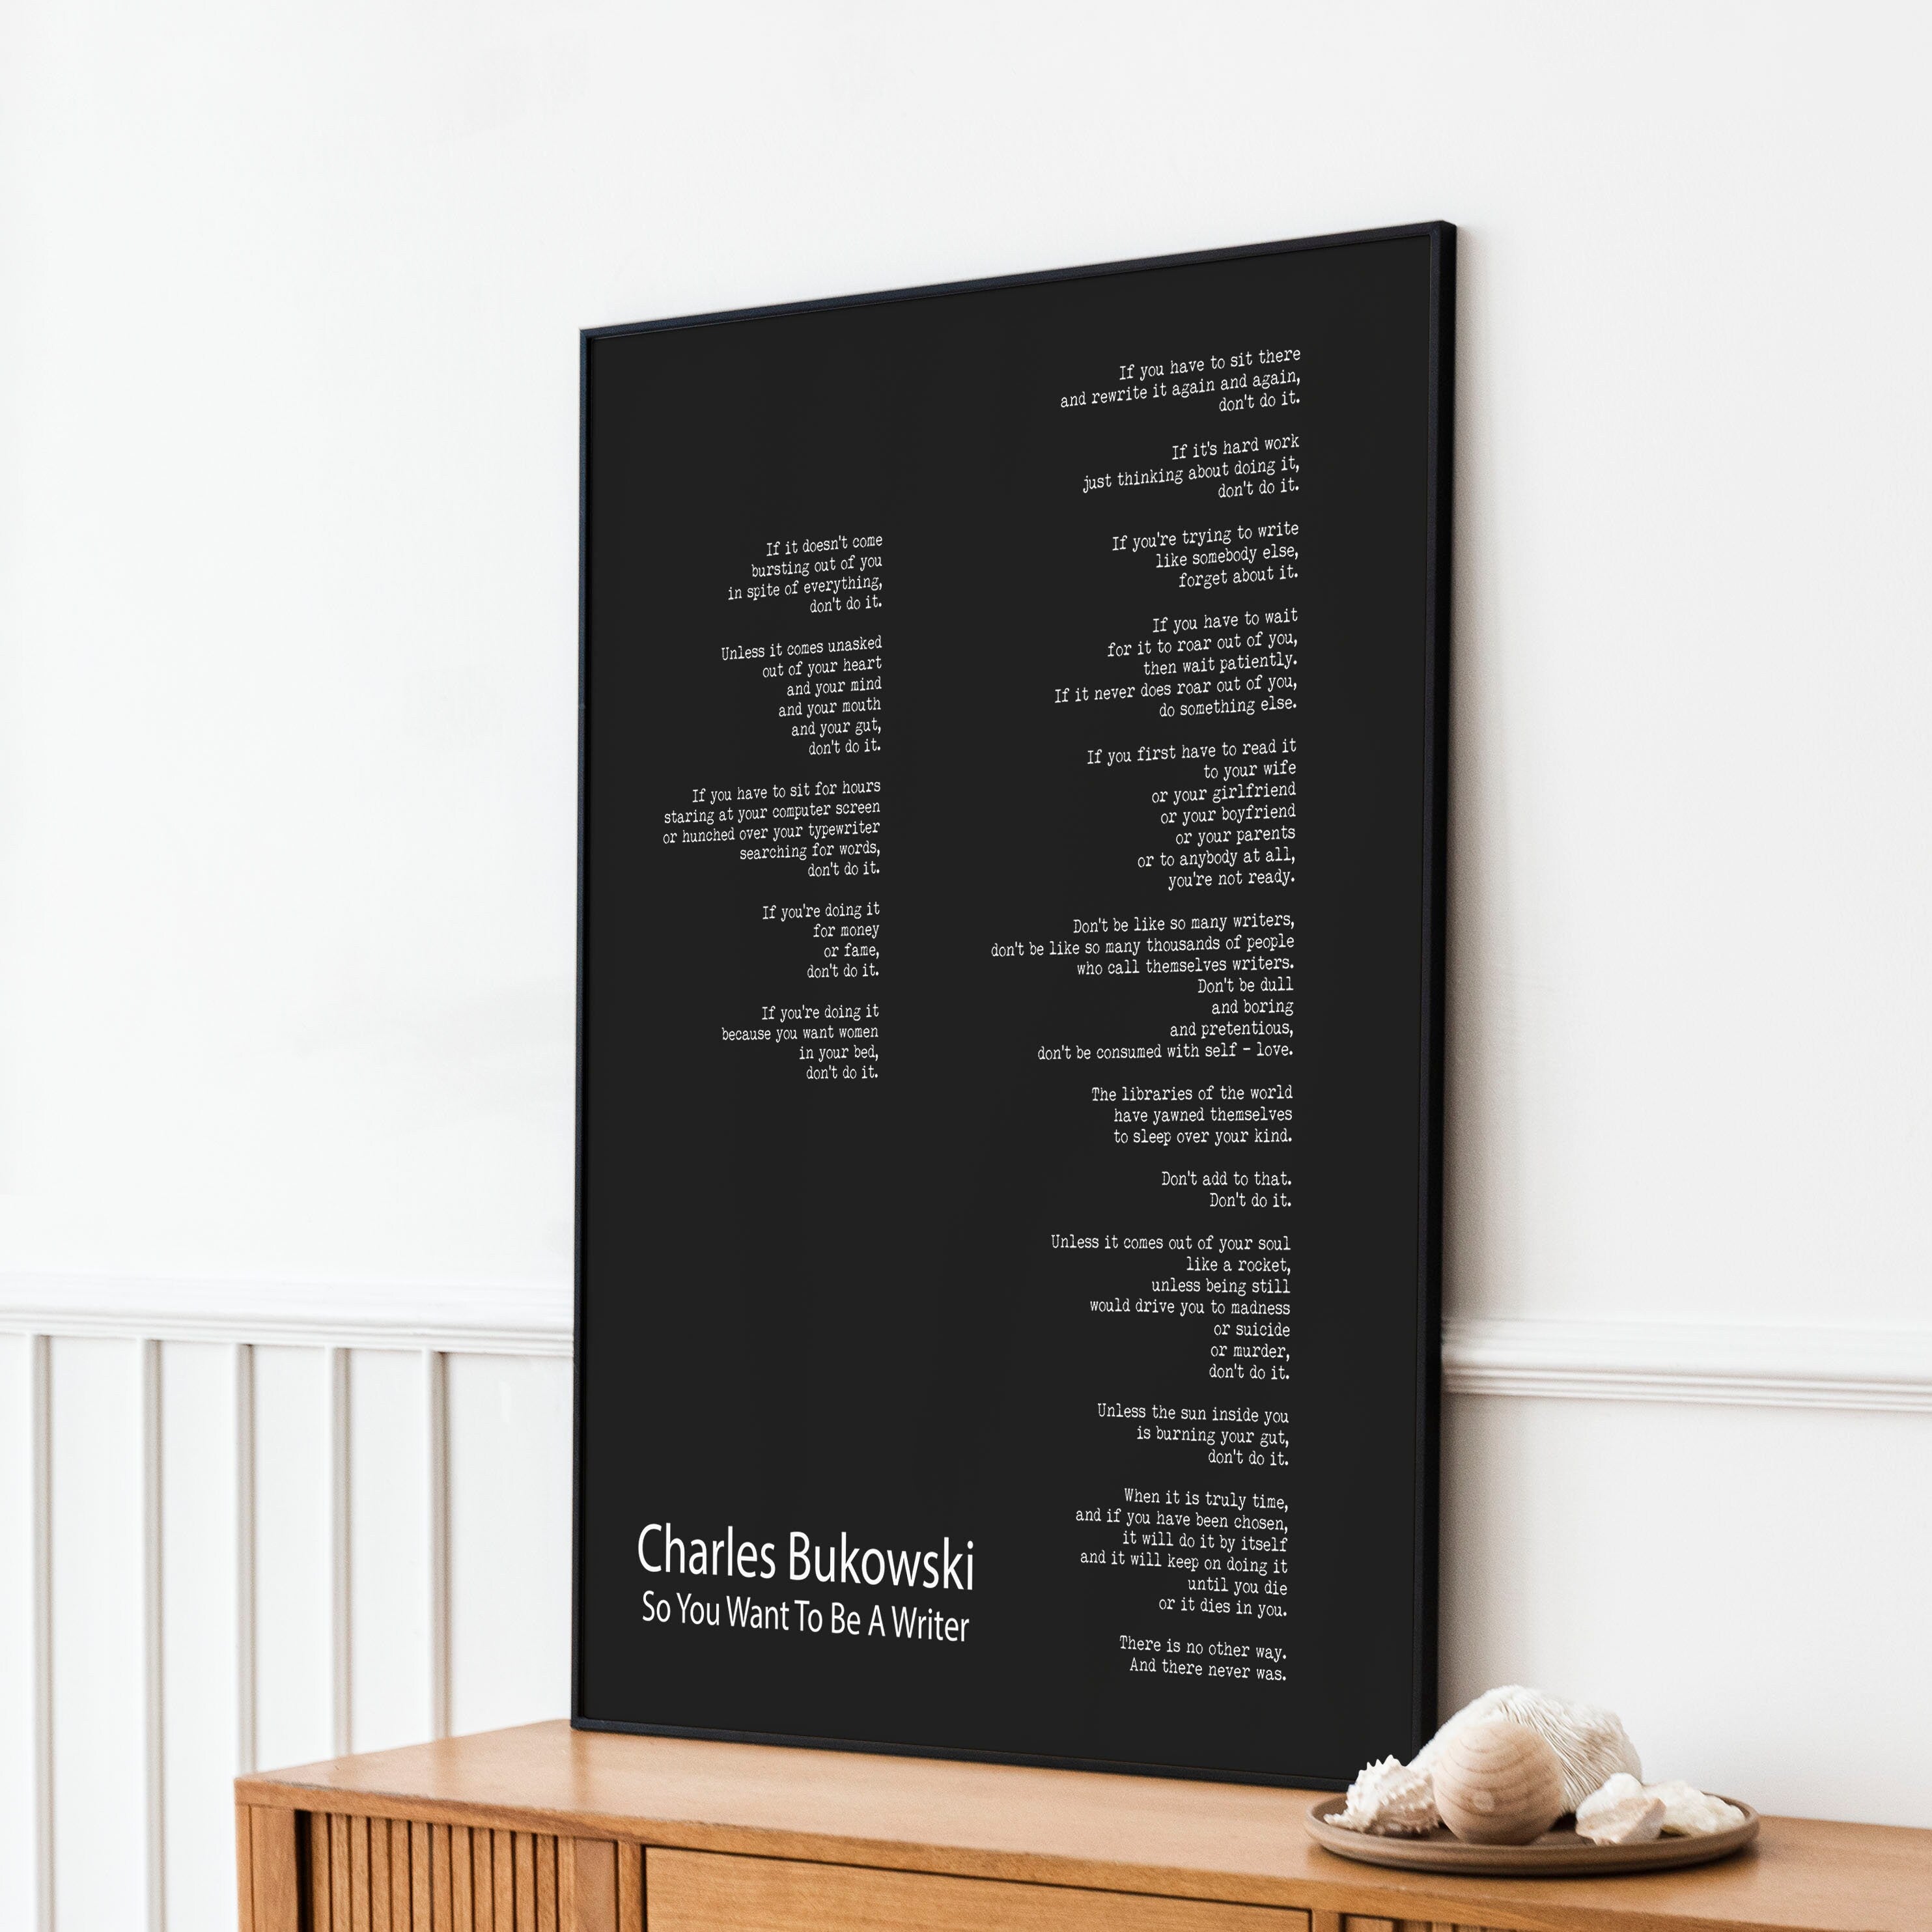 Charles Bukowski Poem Quote Print, Minimalist Black & White Poster Art Print - "So You Want To Be A Writer" Poetry Wall Art